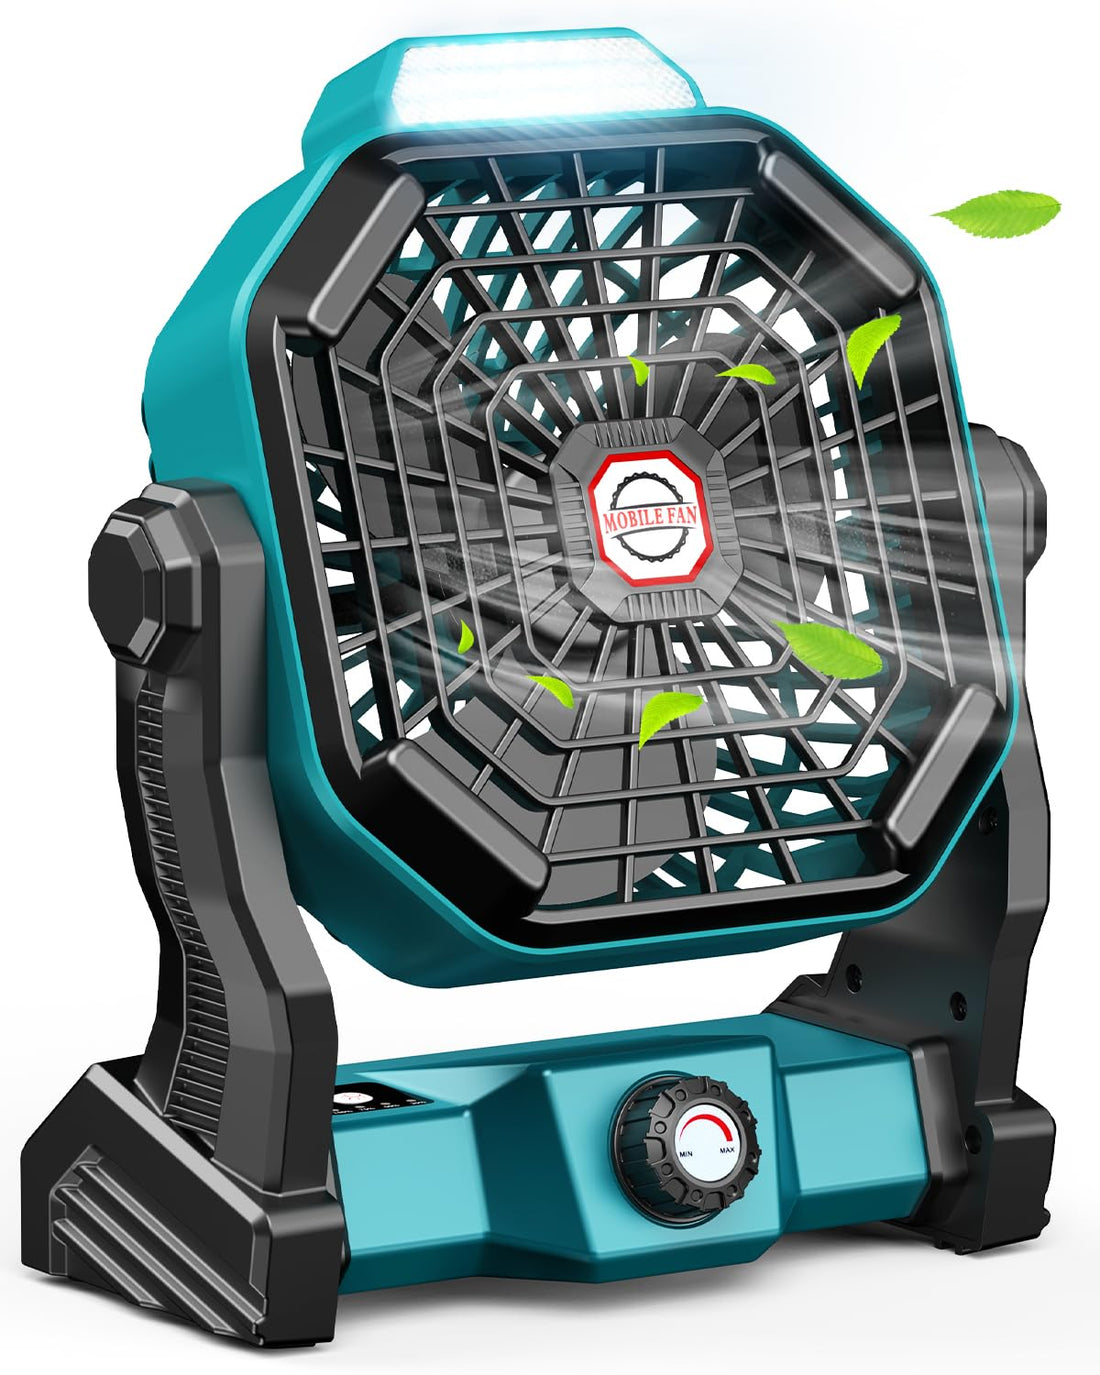 JINLICTE Camping Fan with LED Lantern, 10400mAh 9-Inch Rechargeable Outdoor Tent Fan, 270°Head Rotation, Stepless Speed and Quiet Battery Operated USB Fan for Picnic, Barbecue, Fishing, Travel